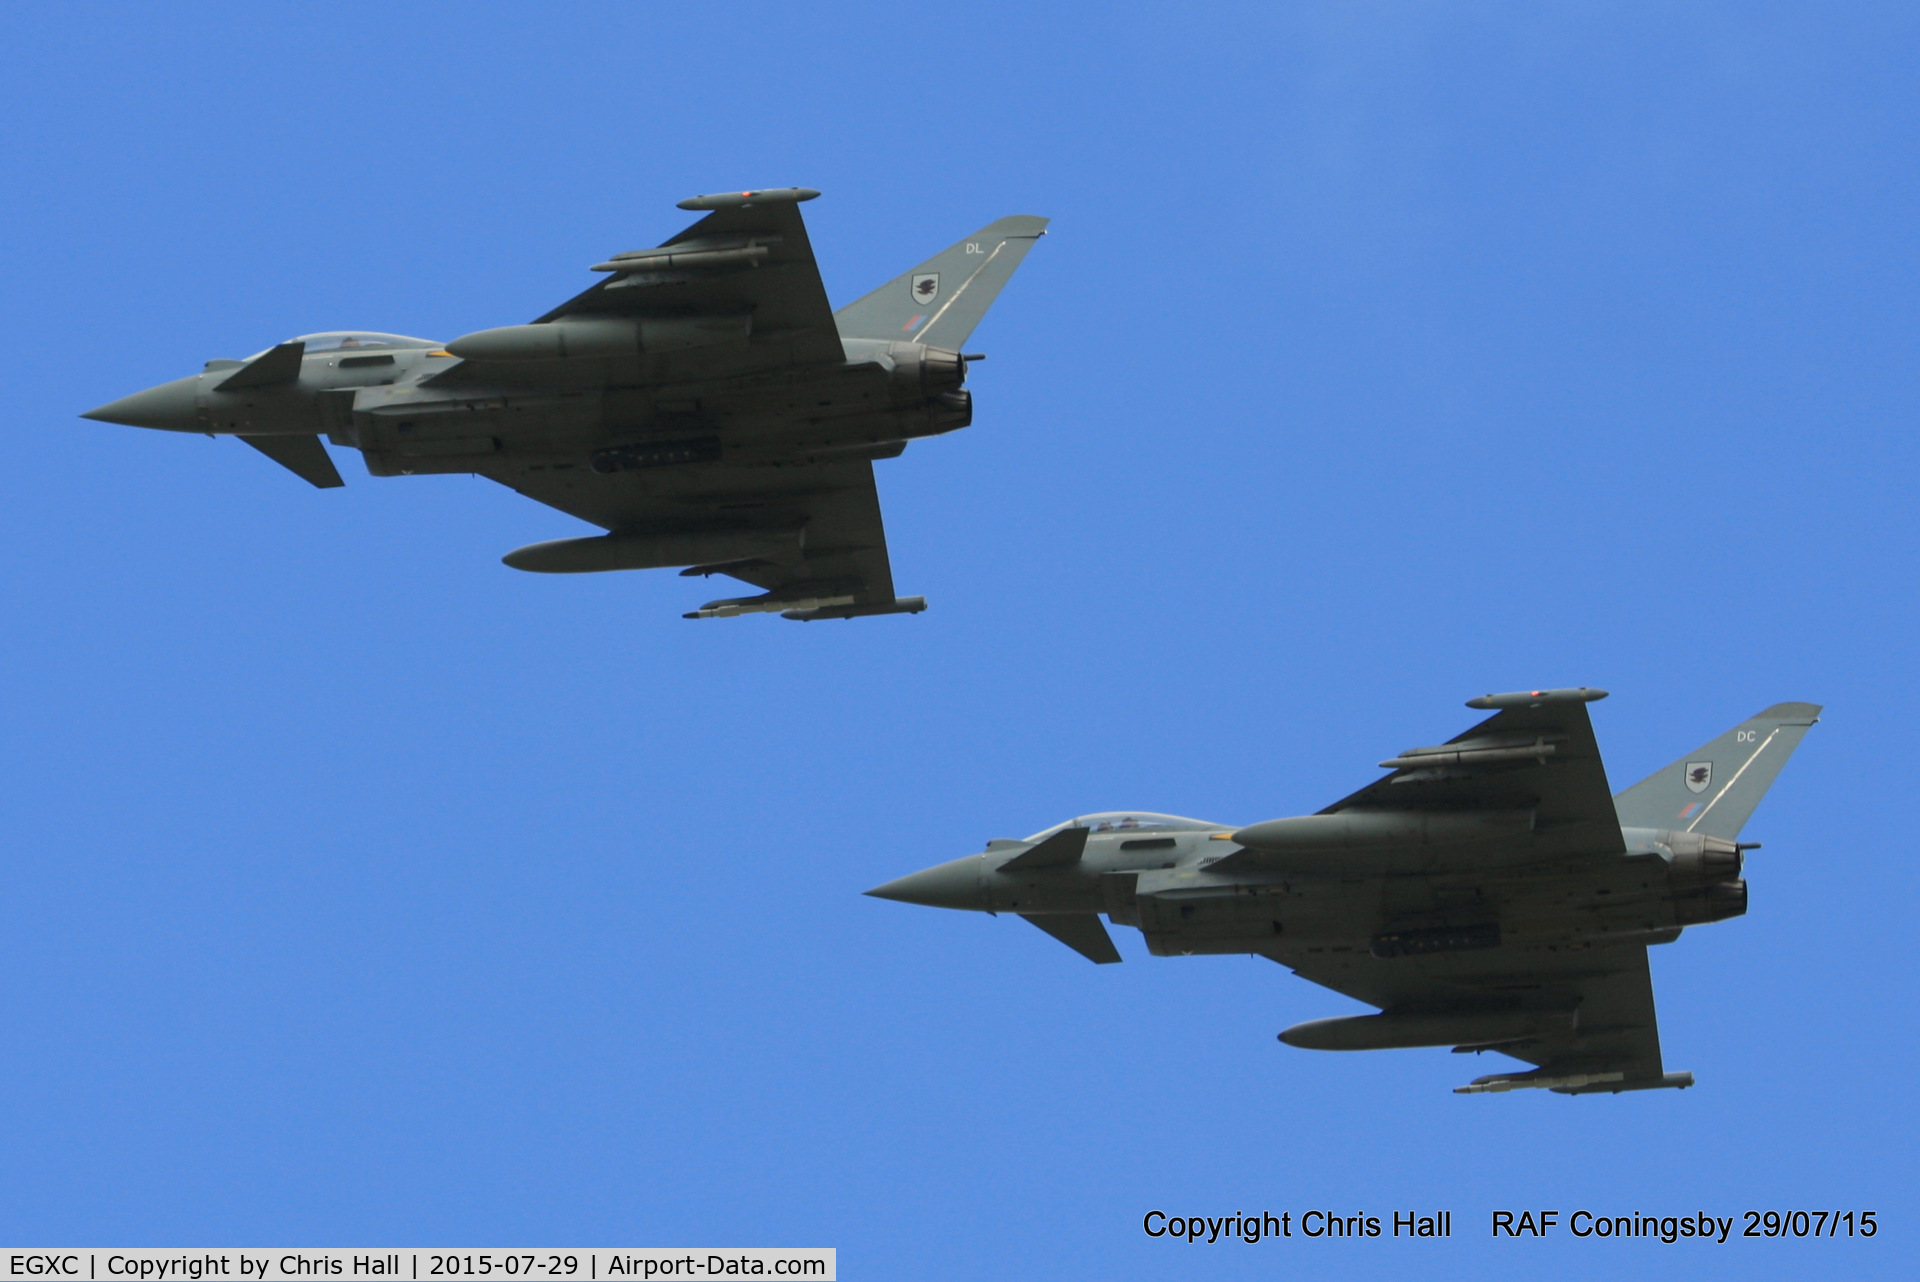 RAF Coningsby Airport, Coningsby, England United Kingdom (EGXC) - ZJ929 and ZJ919 in formation over RAF Coningsby